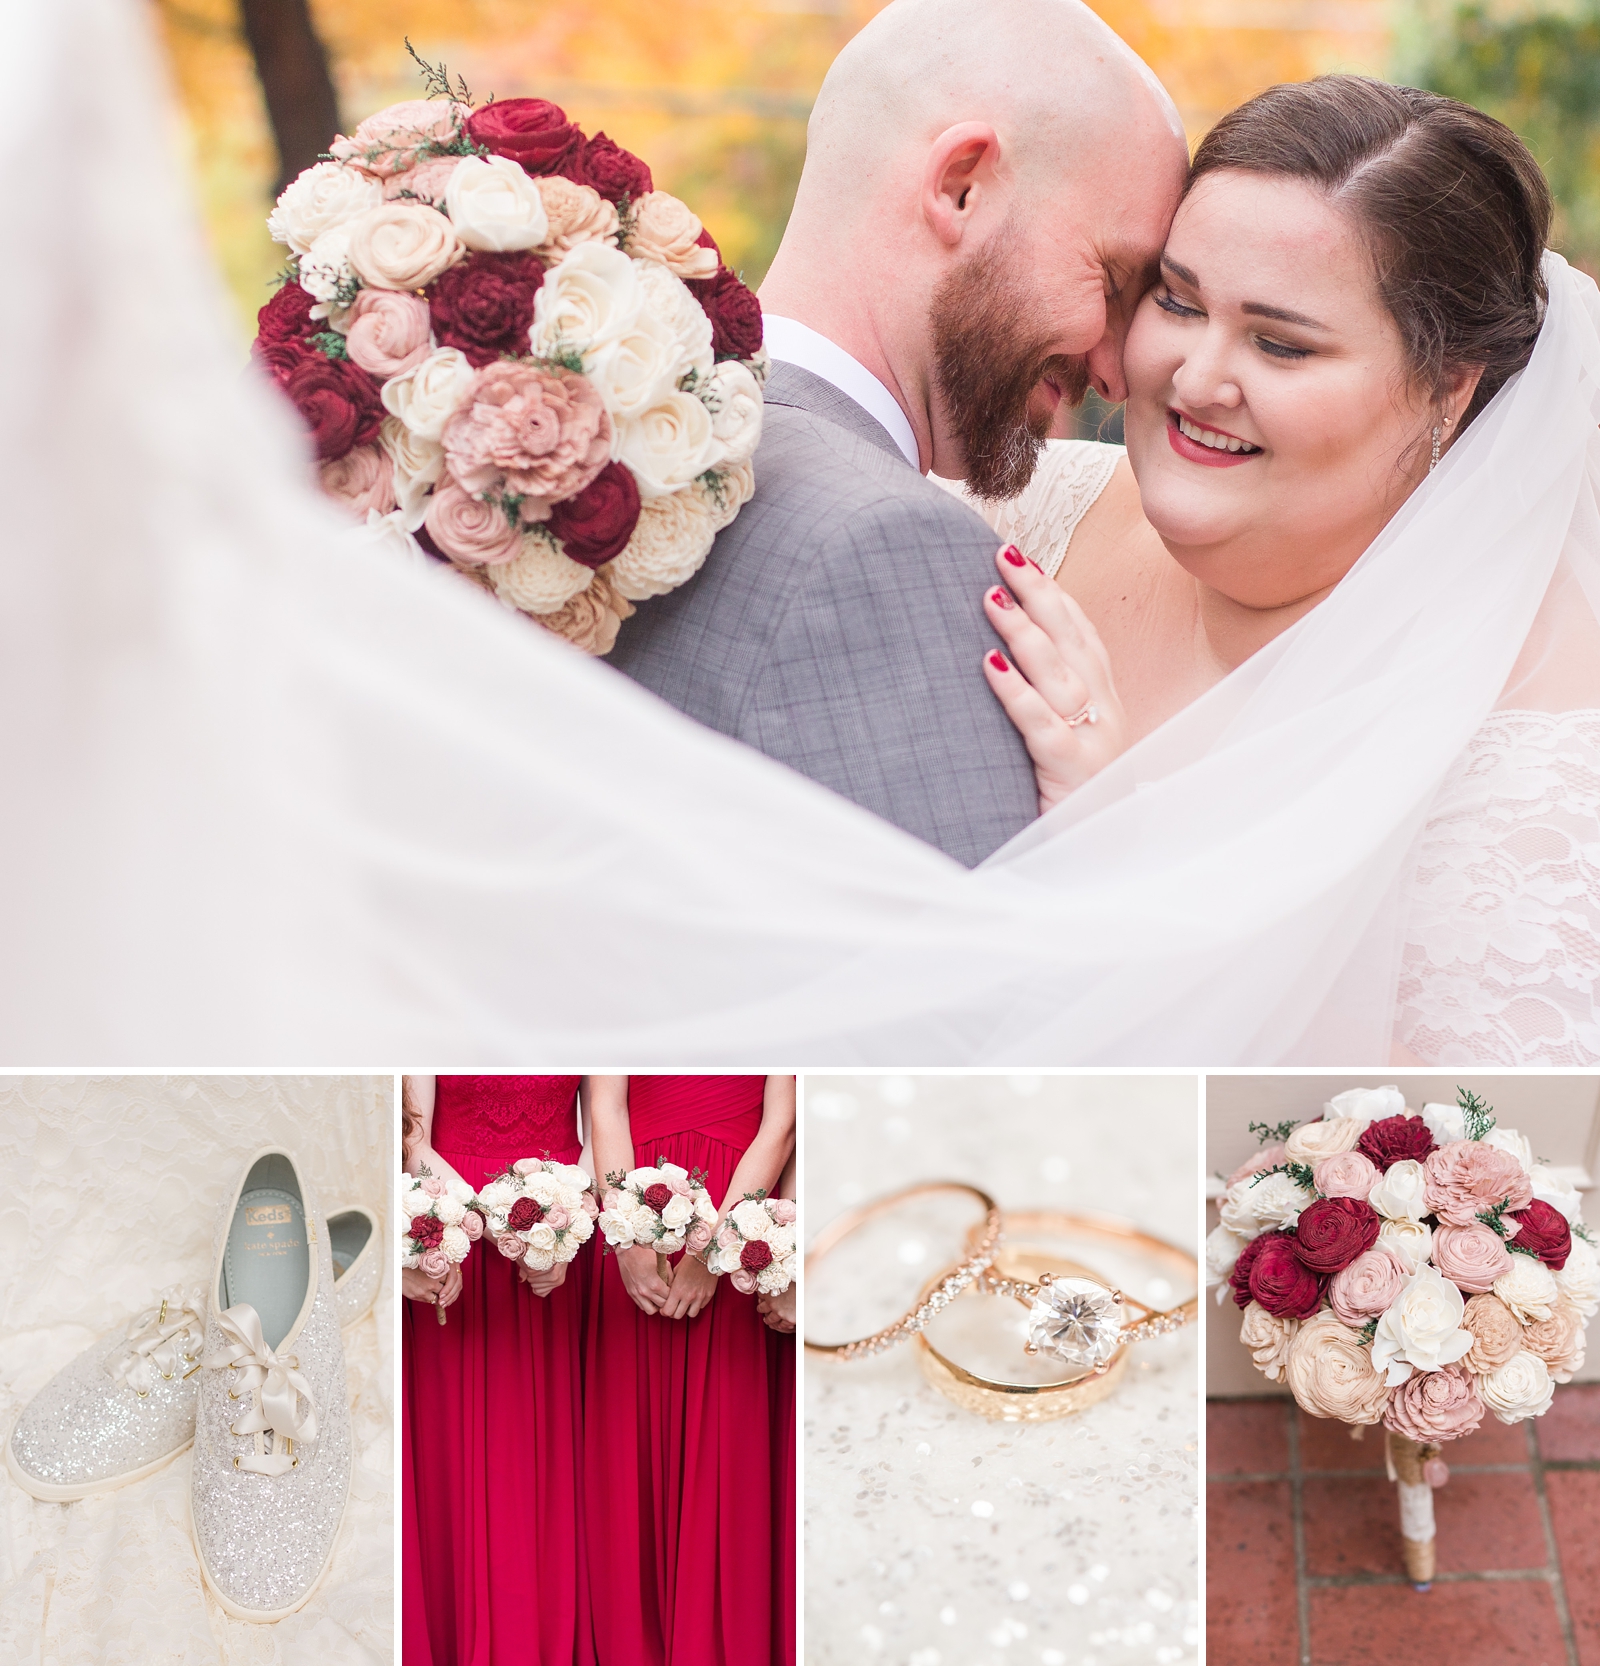 Rainy Downtown Sacramento Sterling Hotel Wedding By Adrienne and Dani Photography